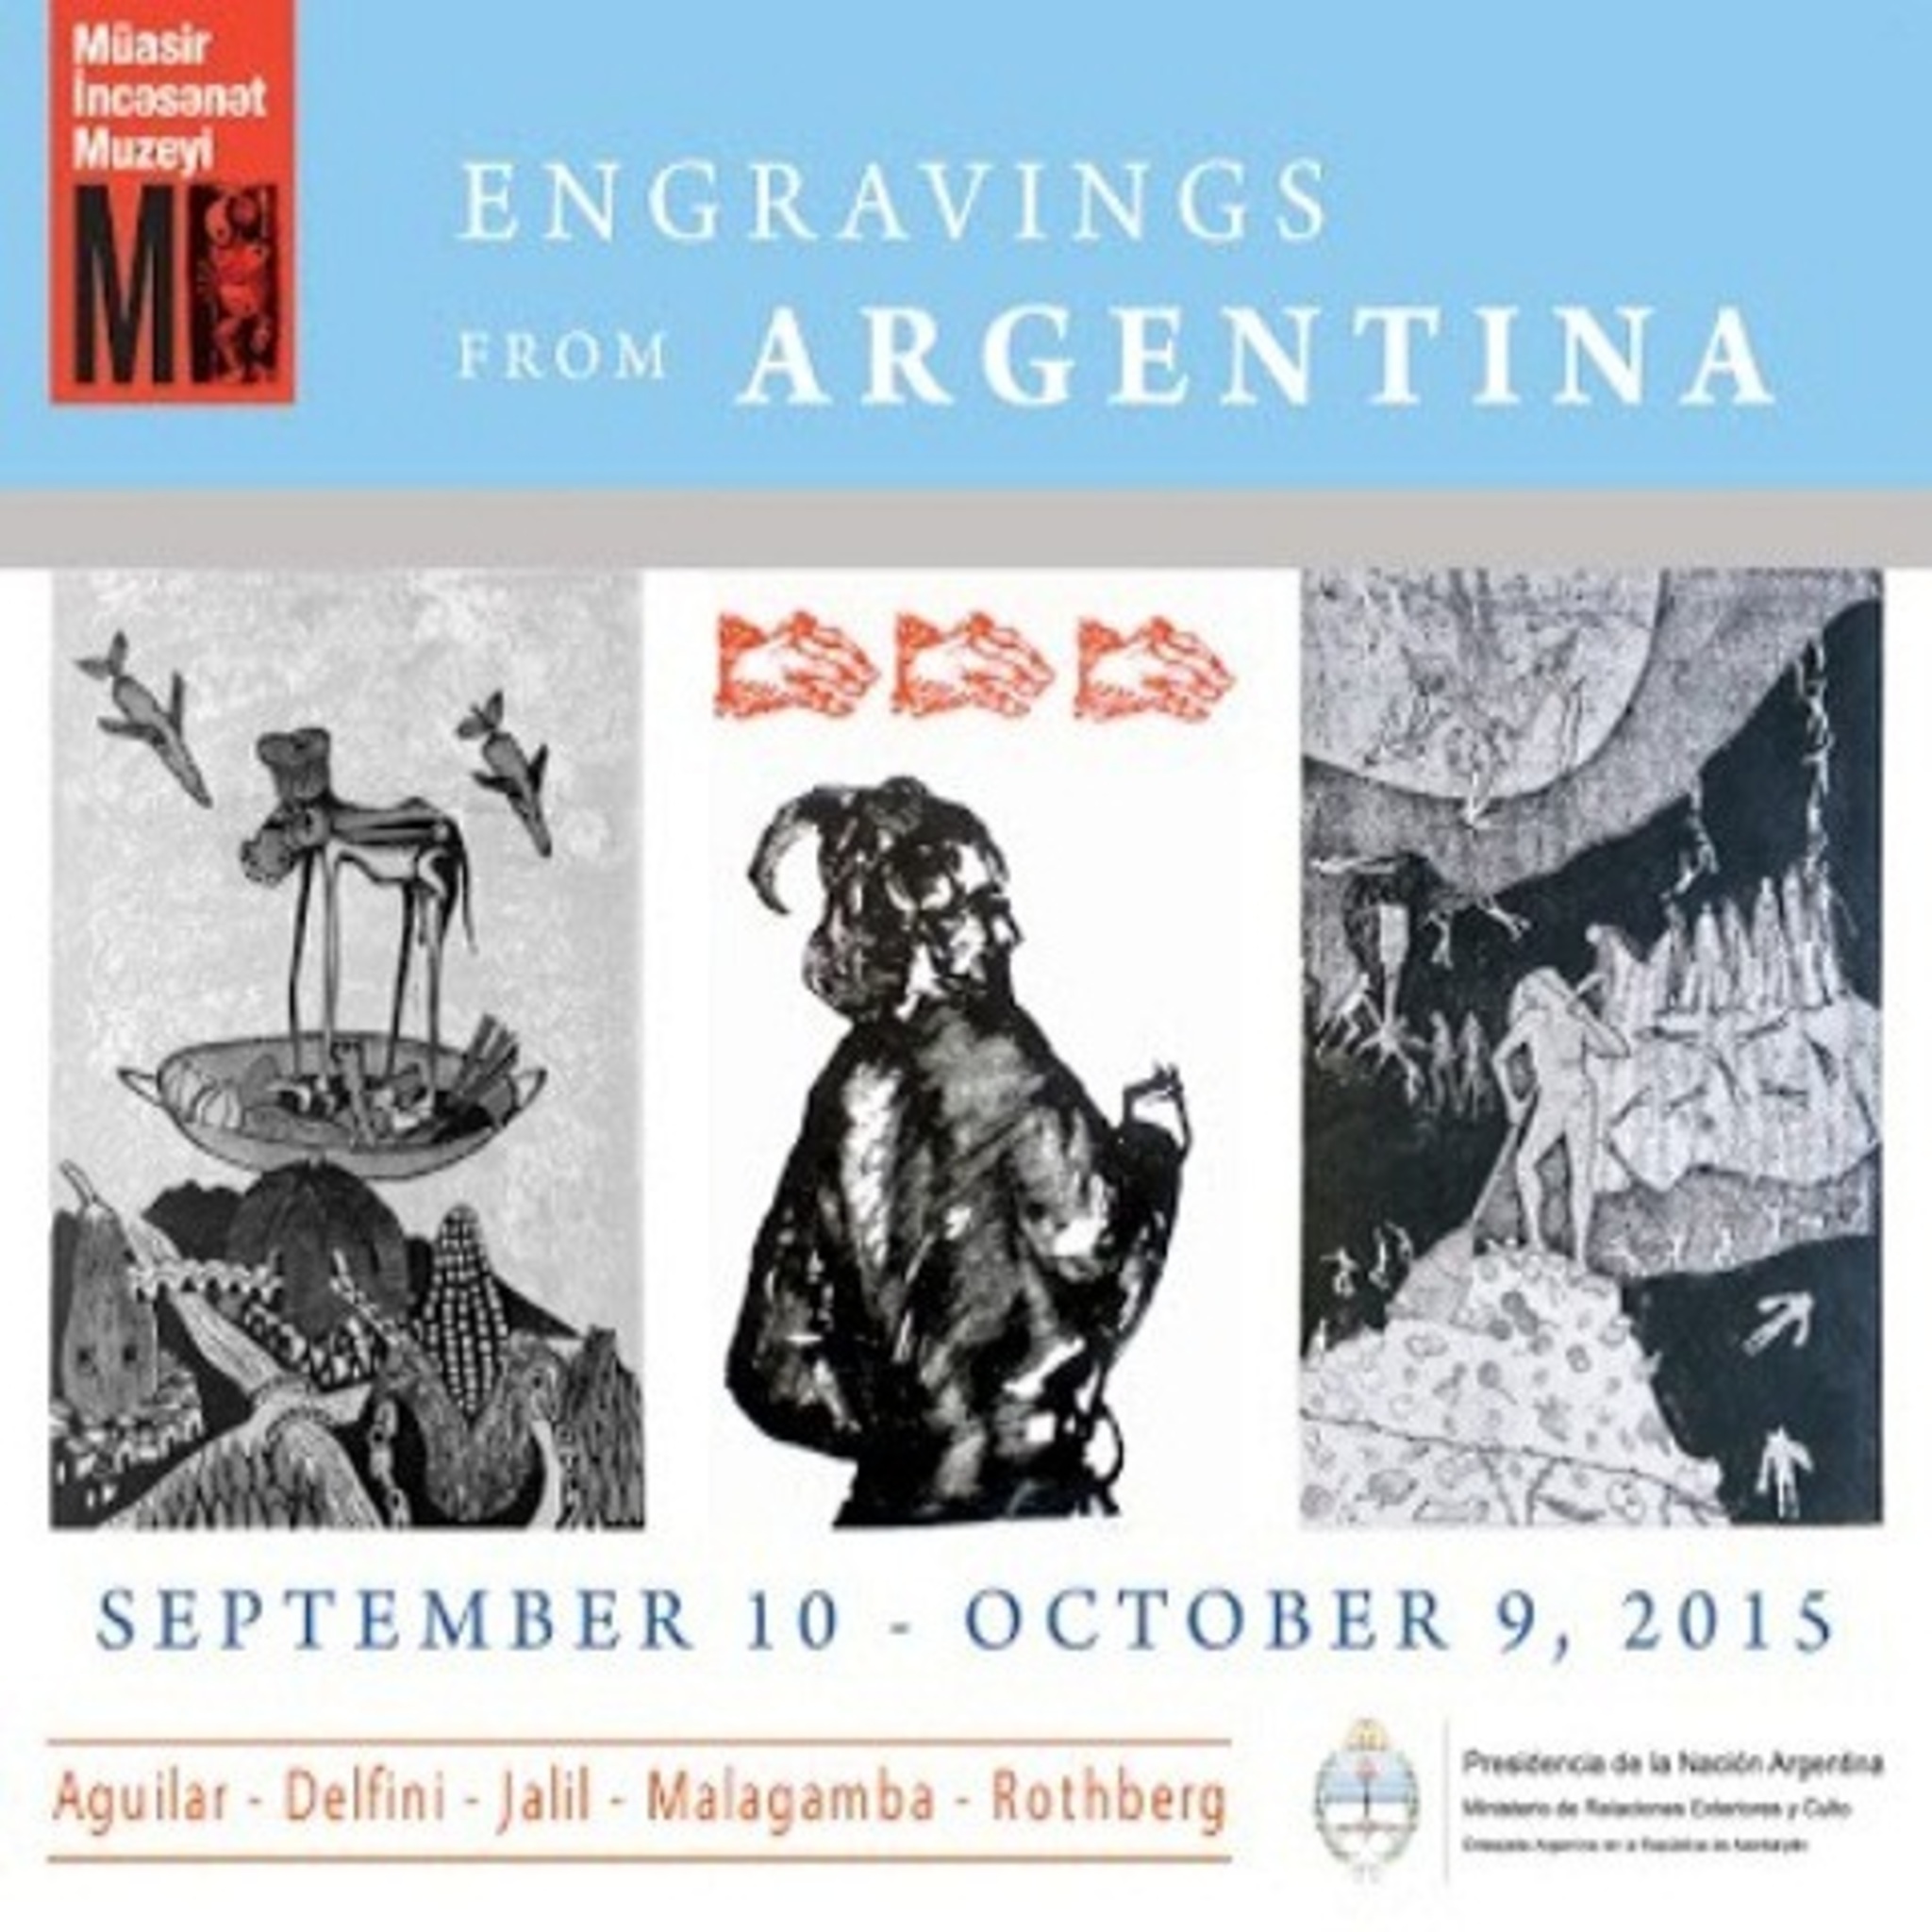 The exhibition Engravings from Argentina